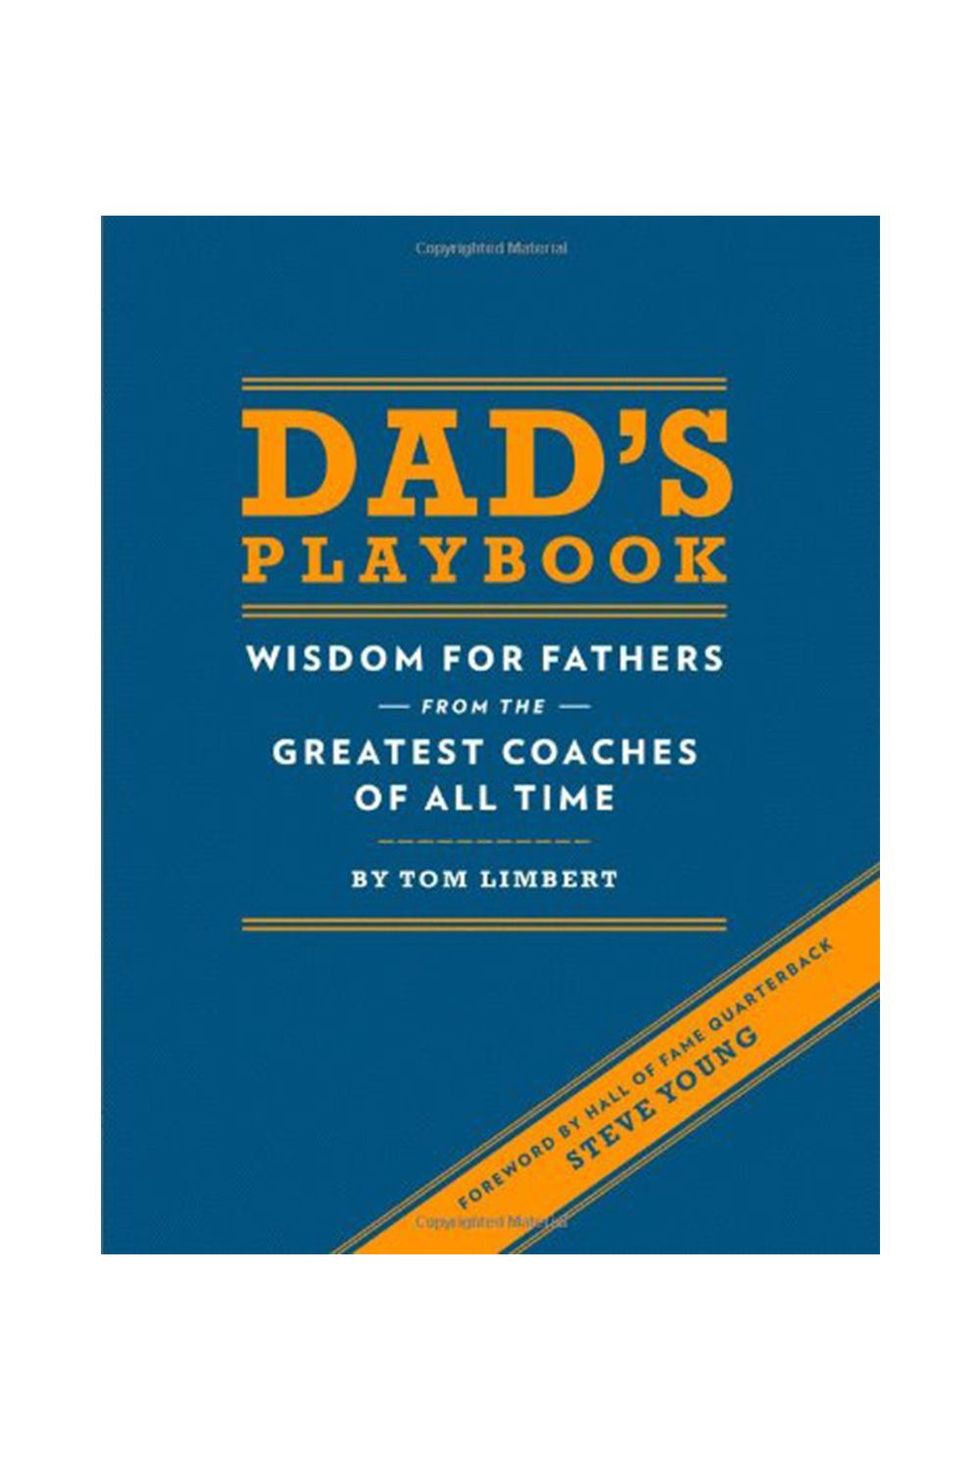 Dad's Playbook: Wisdom for Fathers